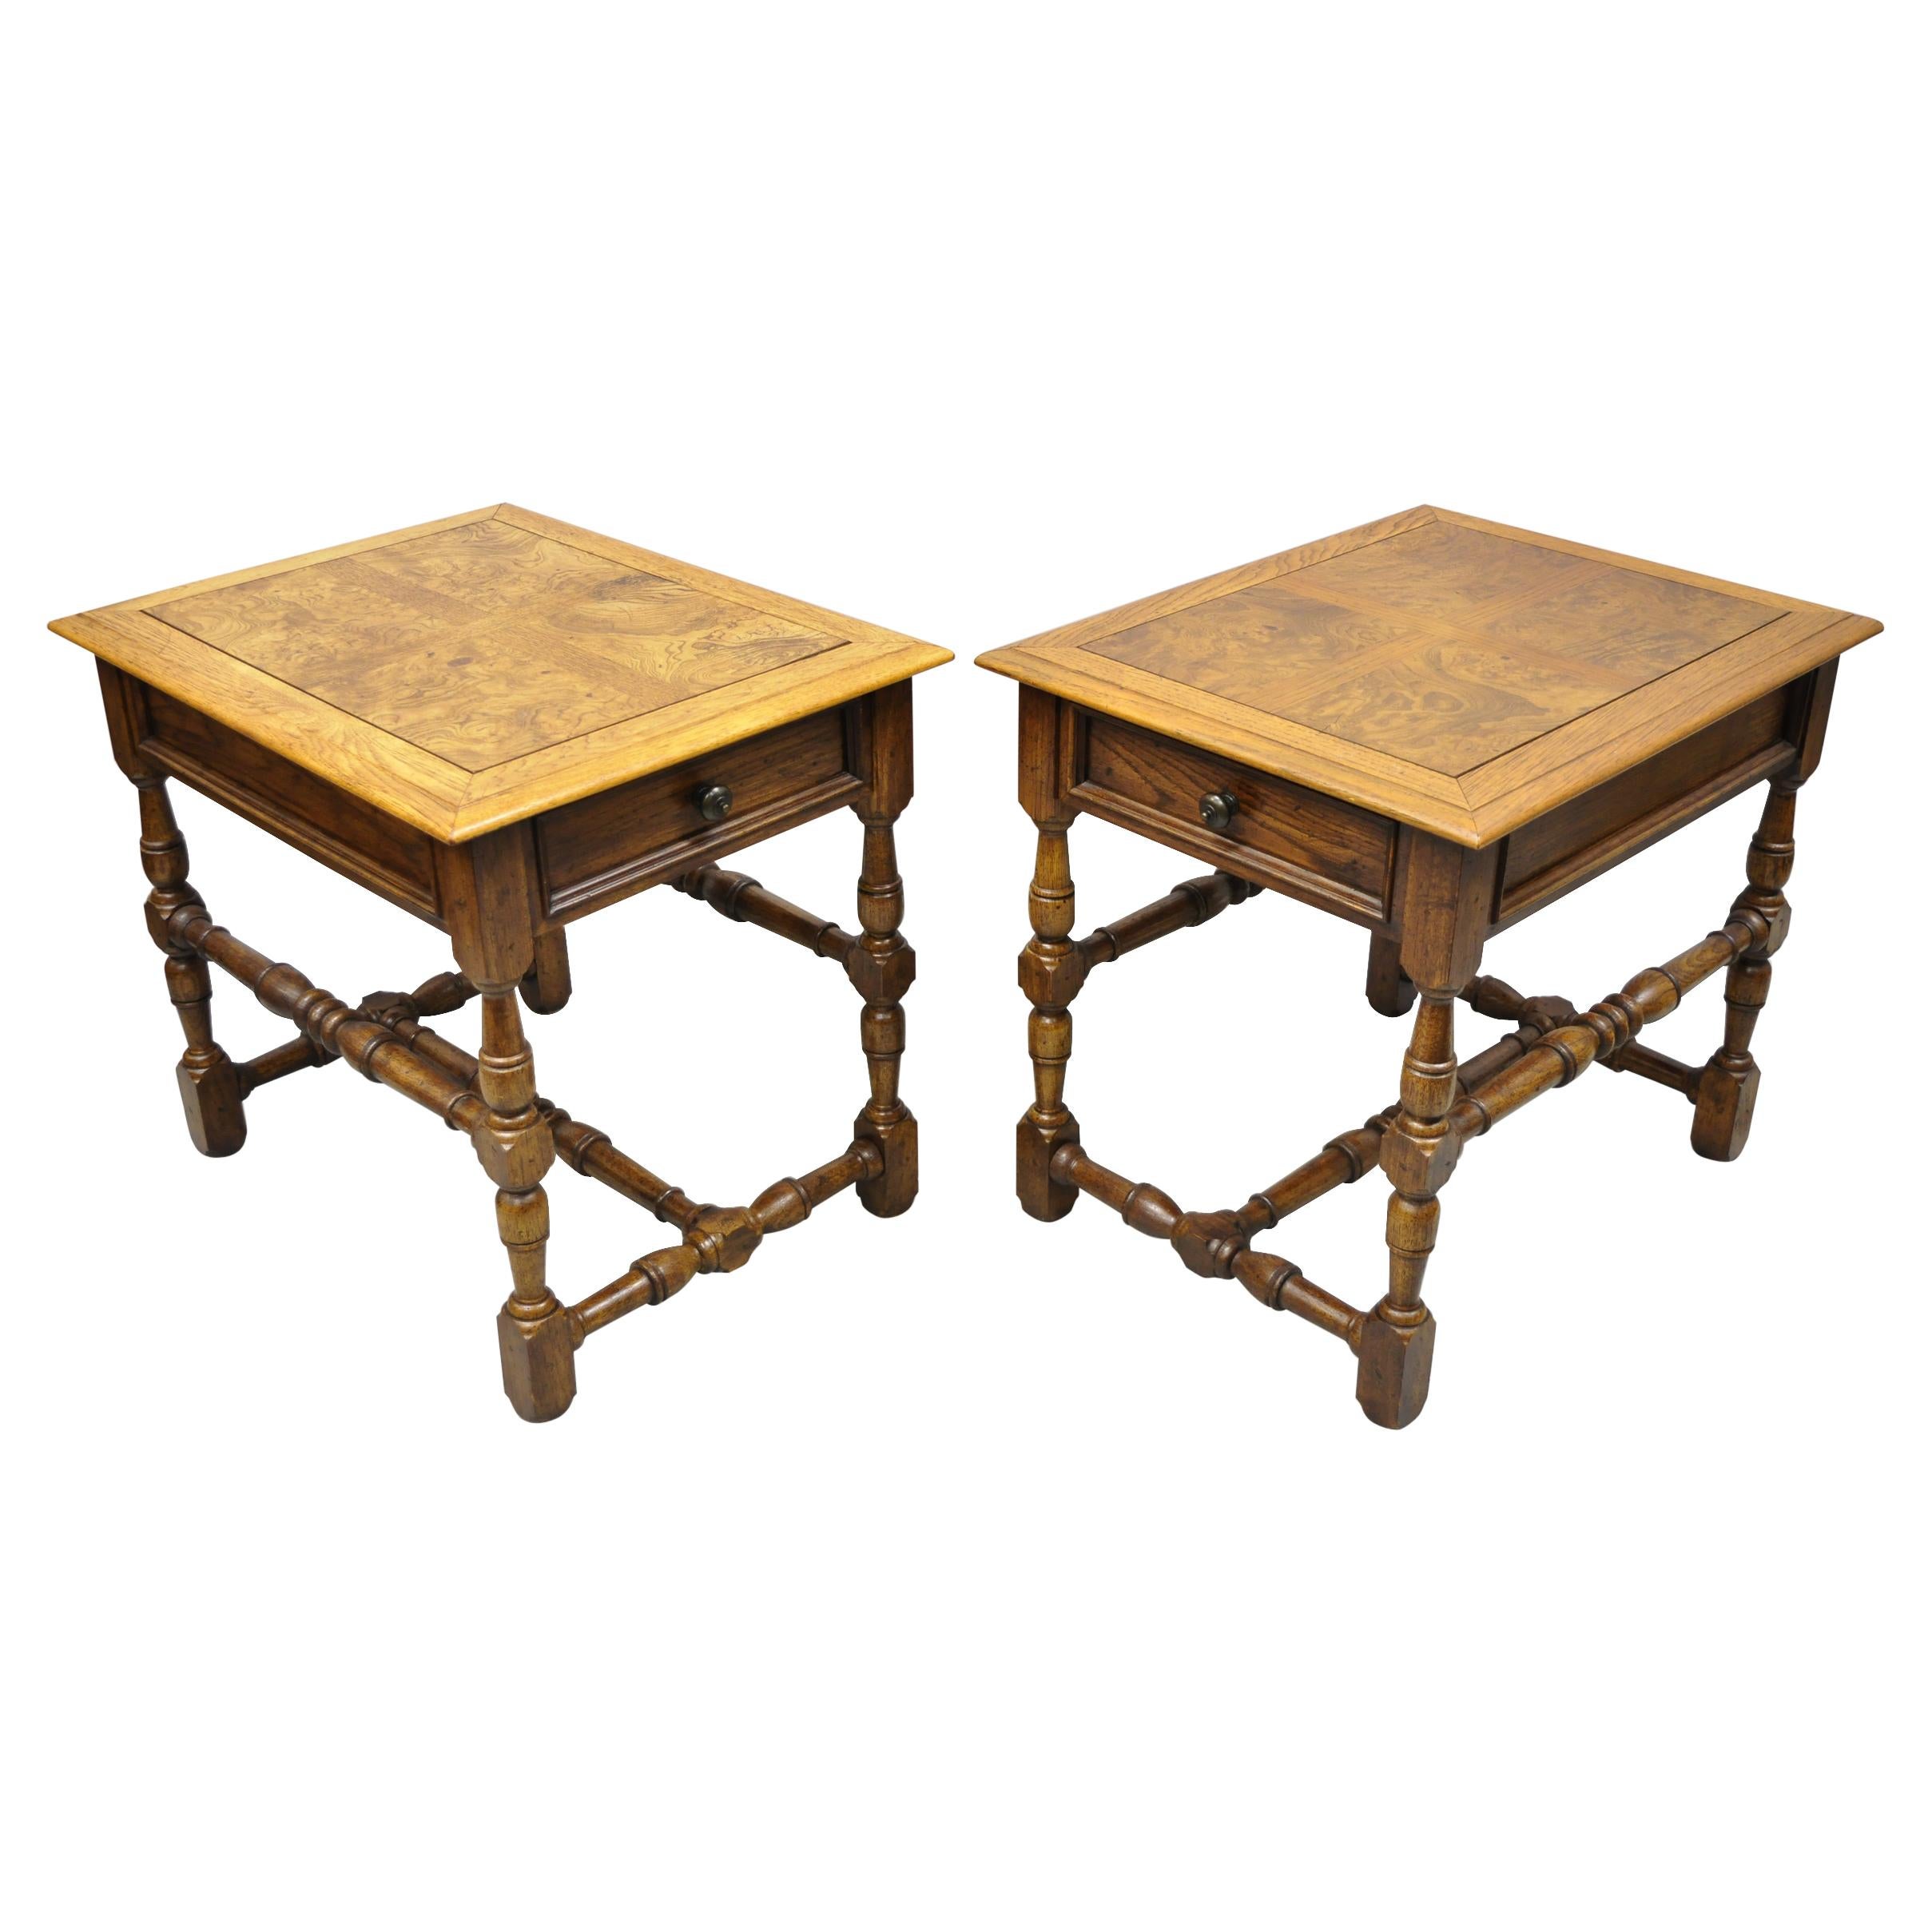 Hekman French Country English Jacobean Oak Burlwood Lamp End Tables, a Pair For Sale